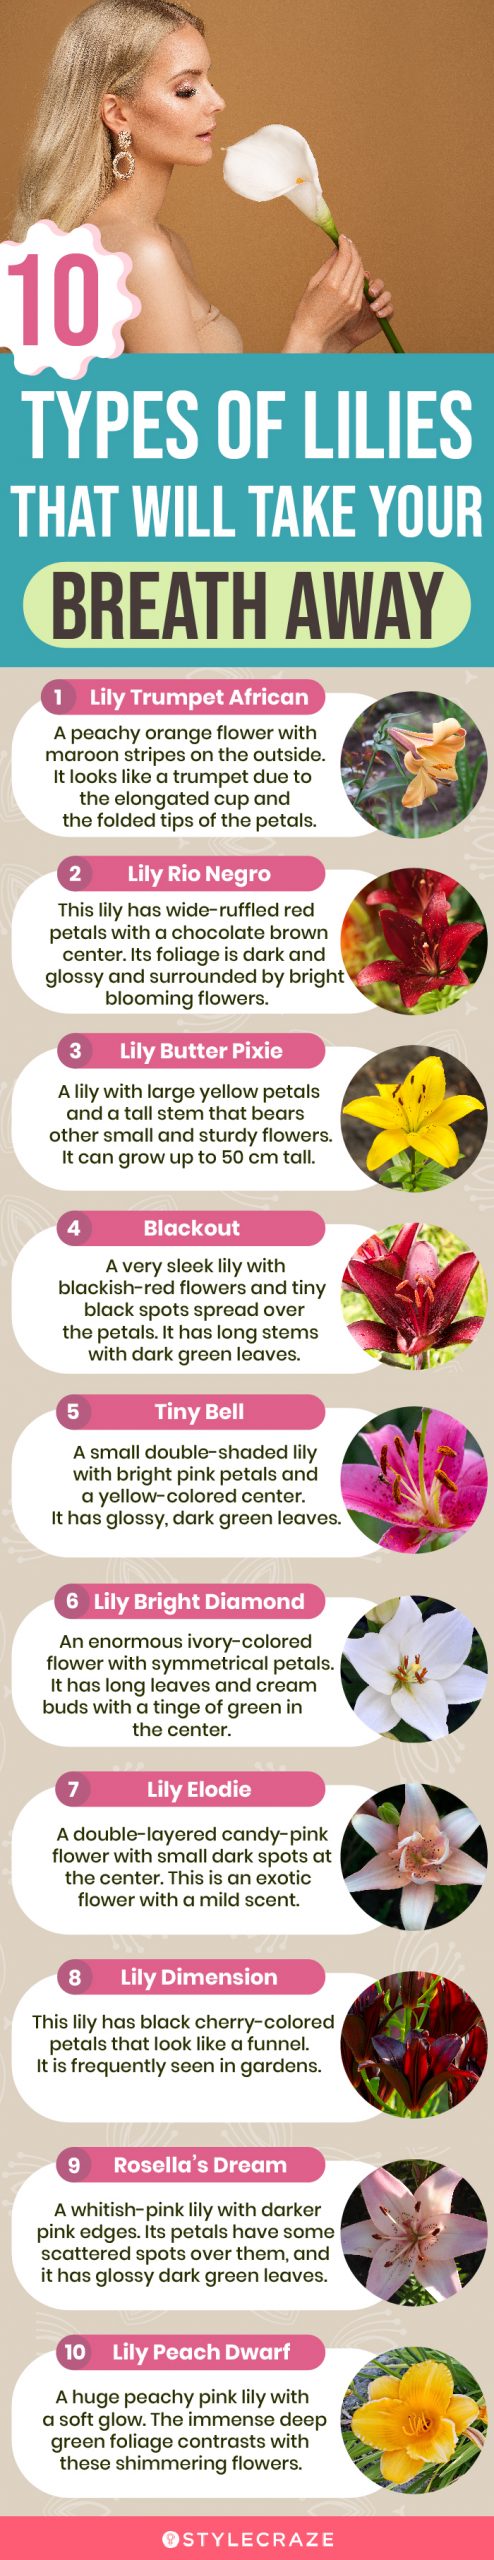 10 lilies that take your breath away (infographic)